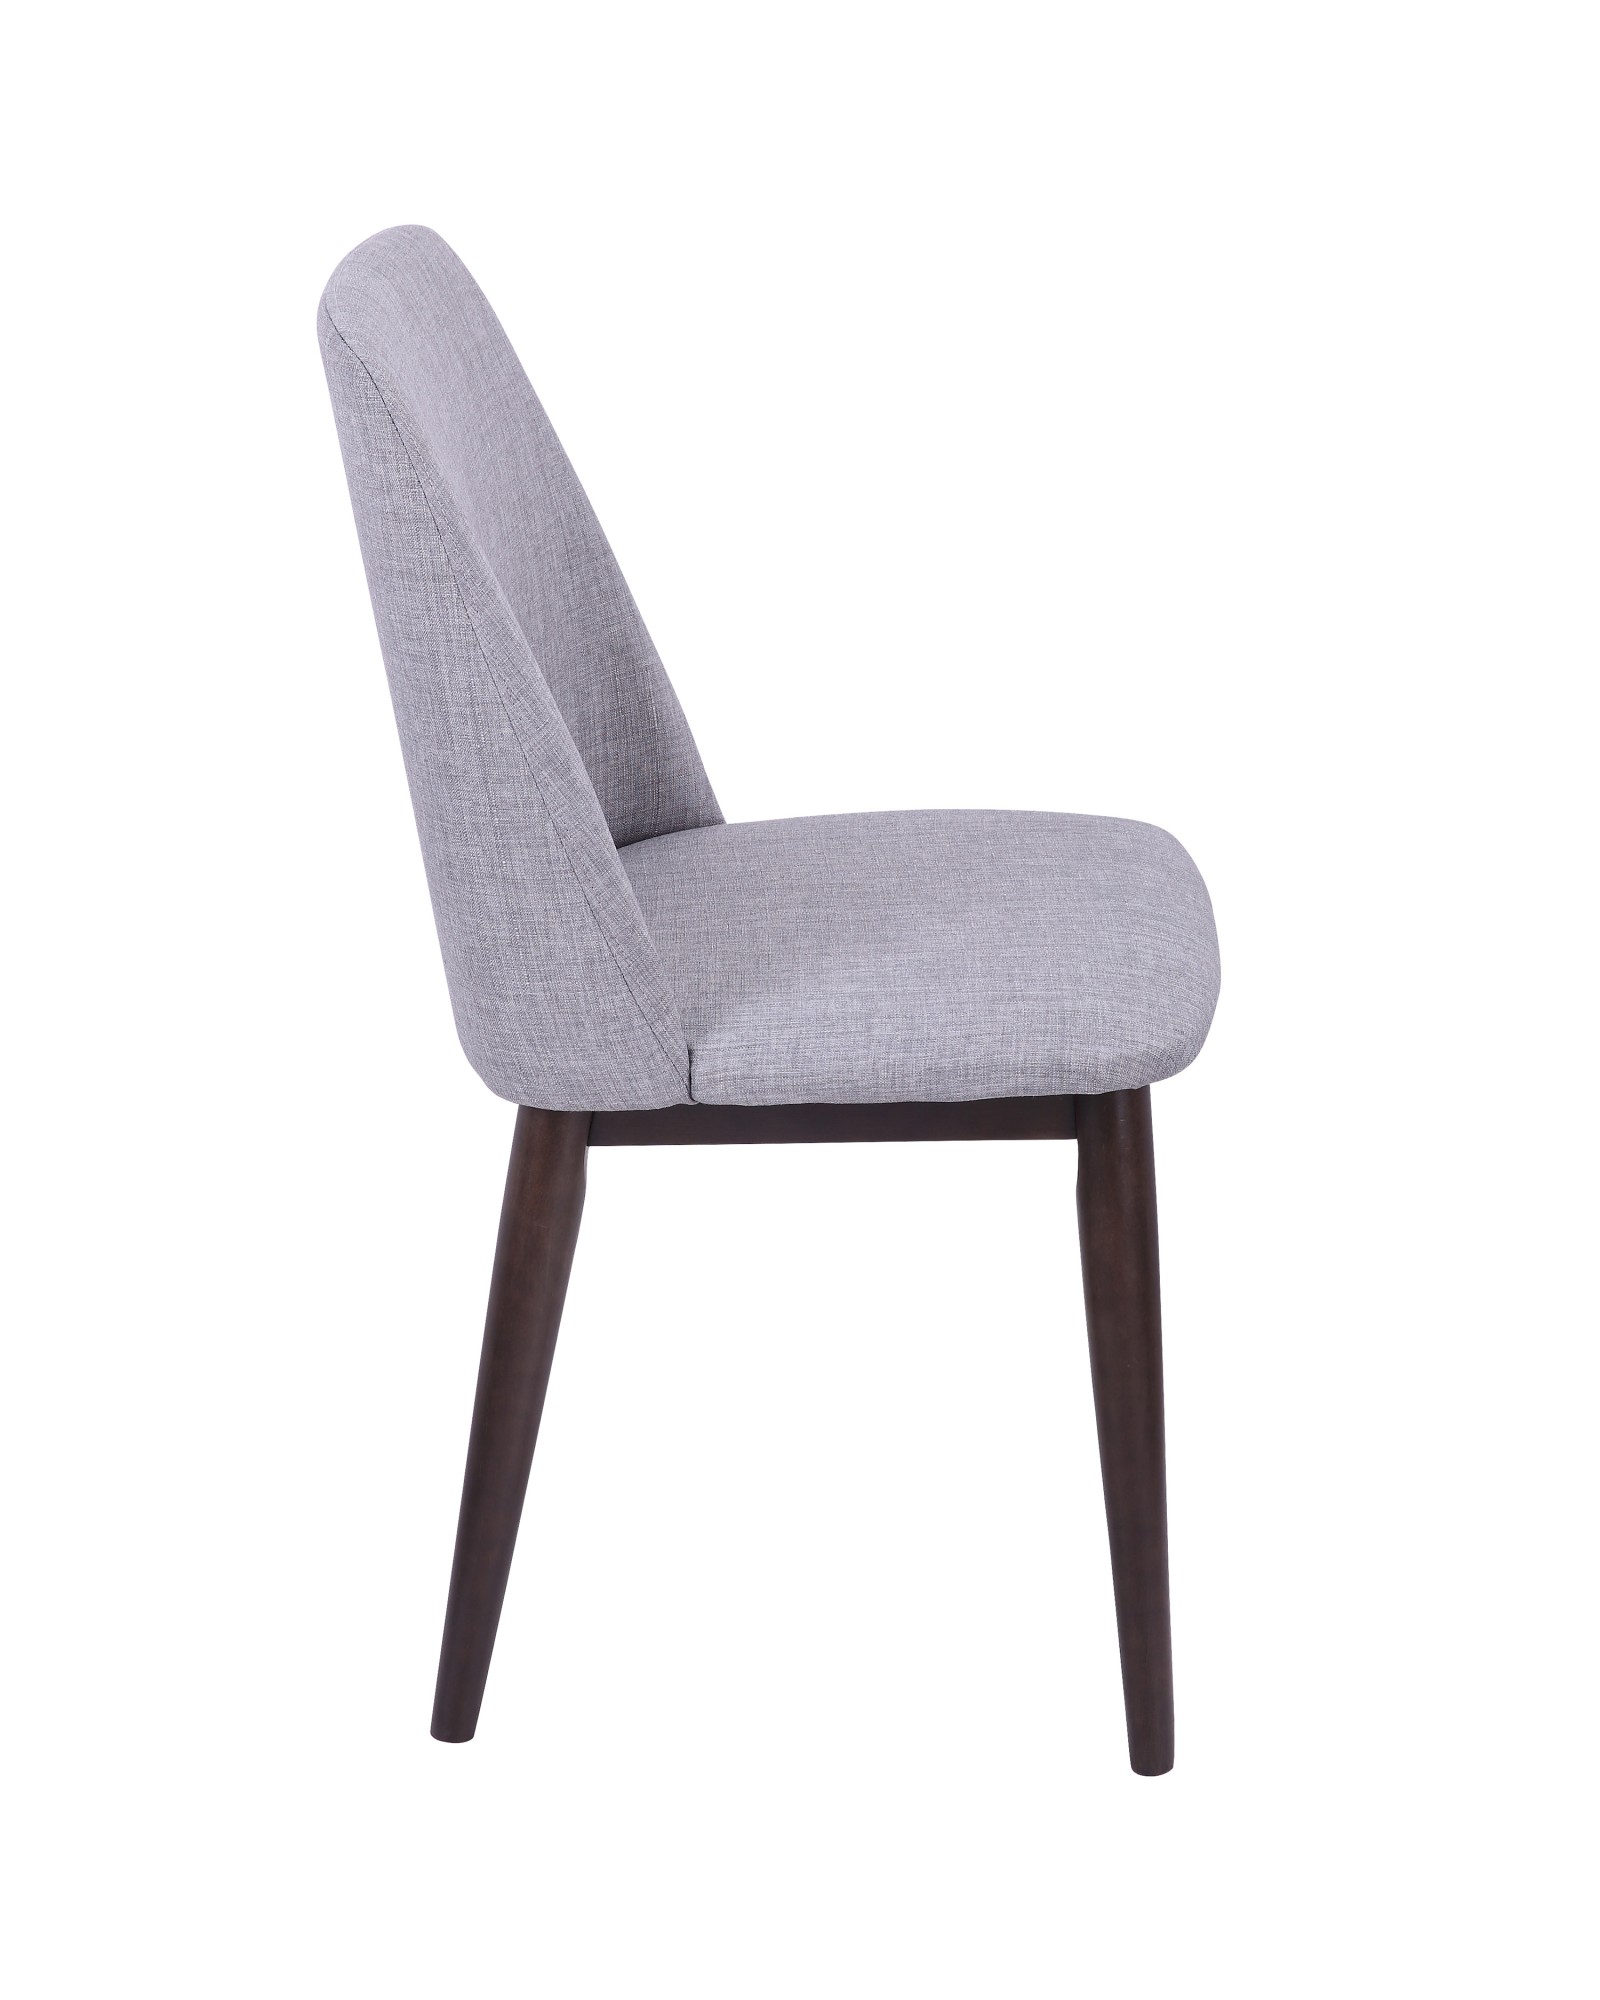 Tintori Contemporary Dining Chair in Walnut and Light Grey Fabric - Set of 2